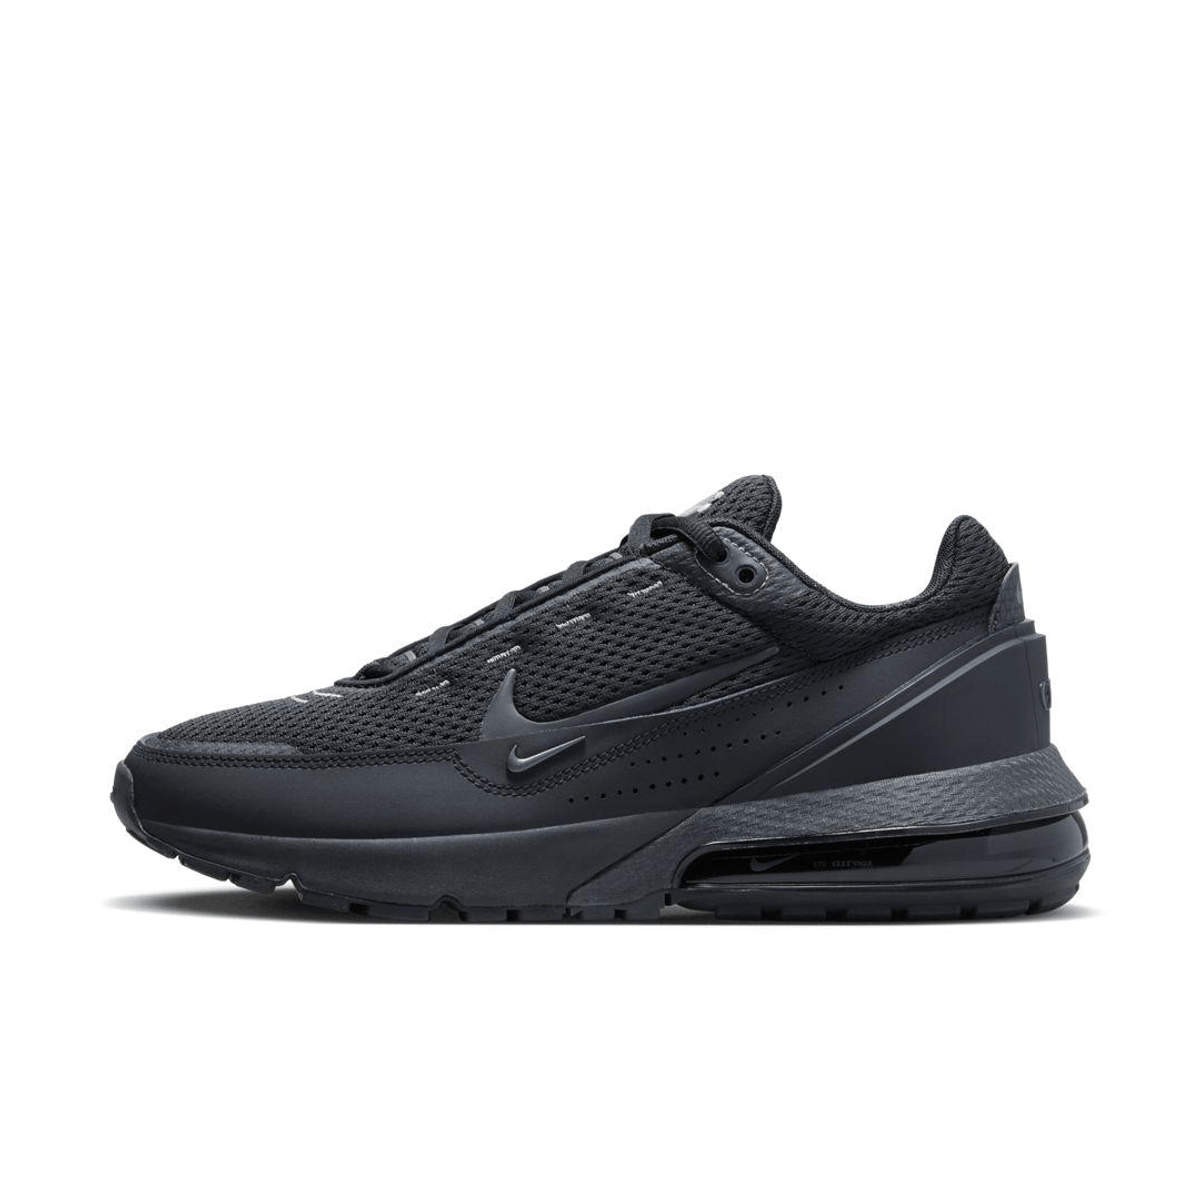 Air Max Pulse Anthracite Takes On The Black Out